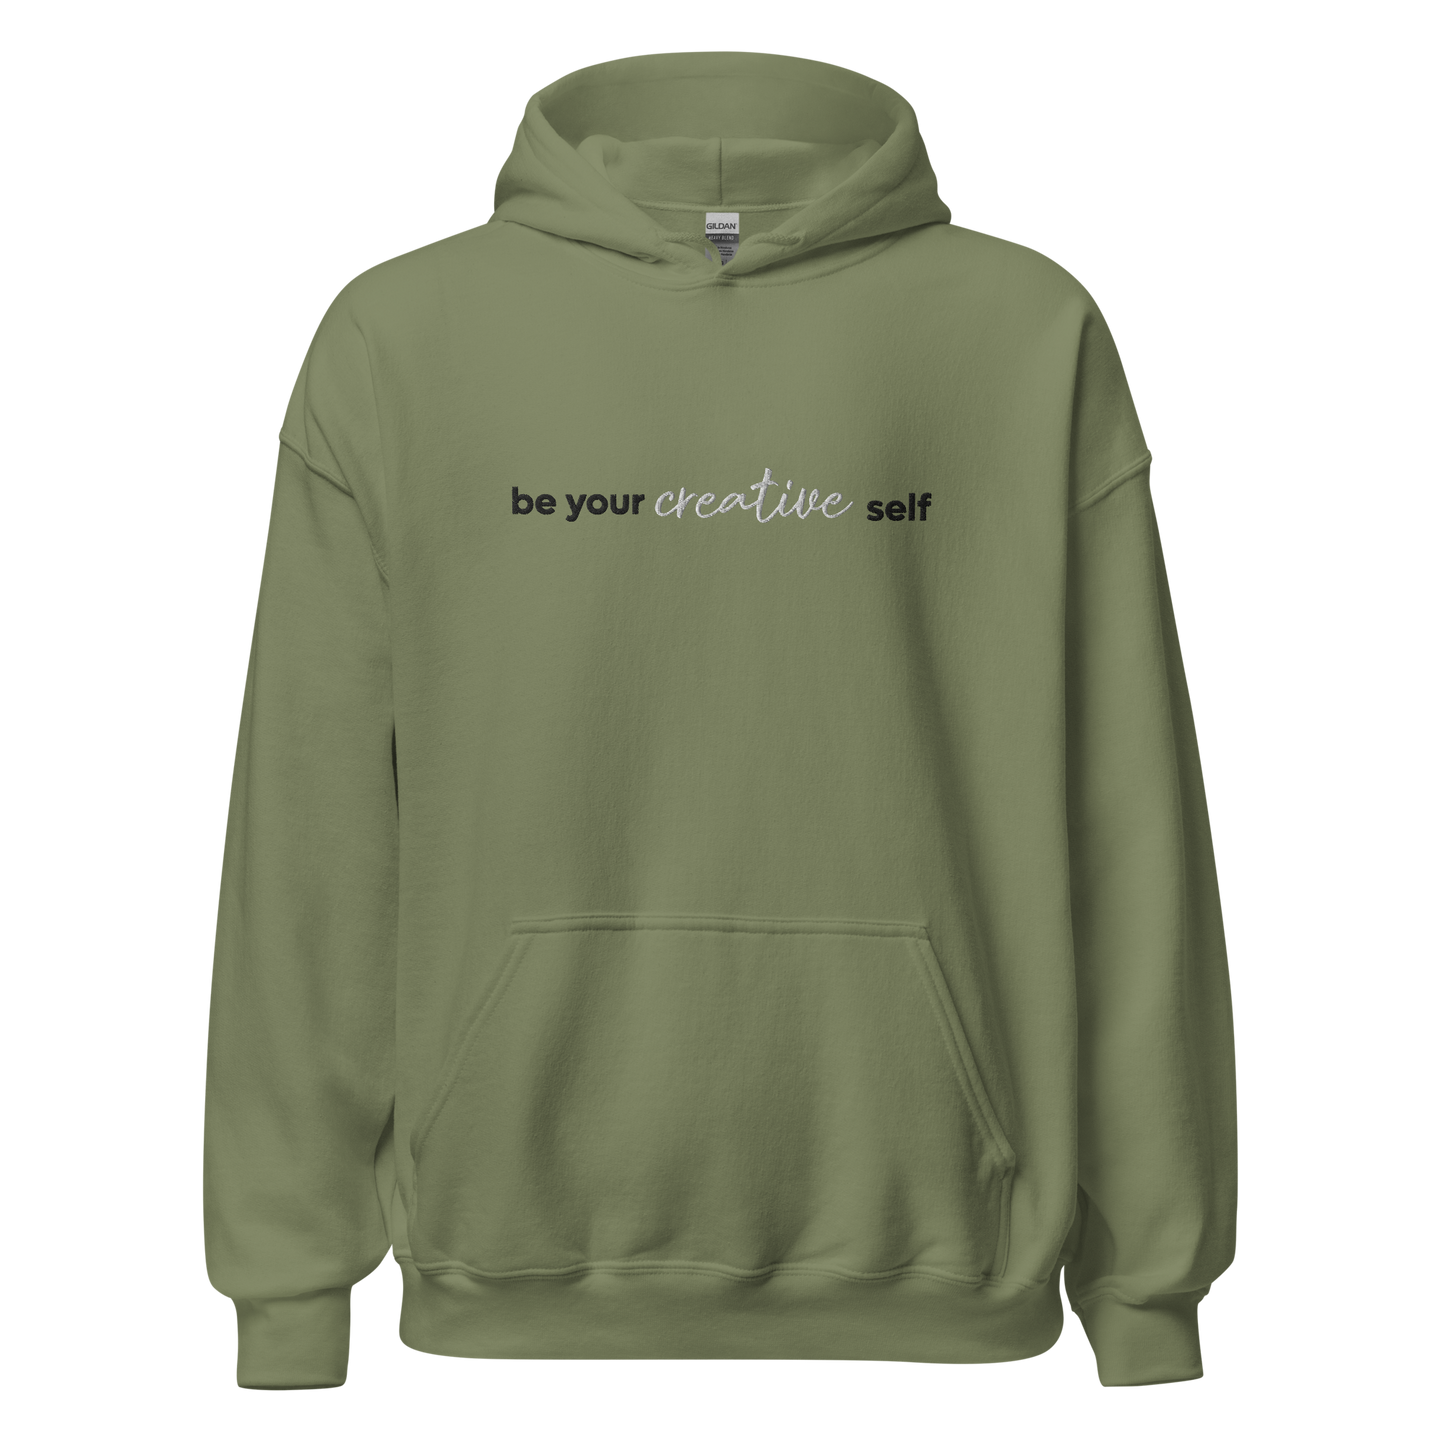 Unisex Comfy Hoodie "Be Your Creative Self" Embroidered